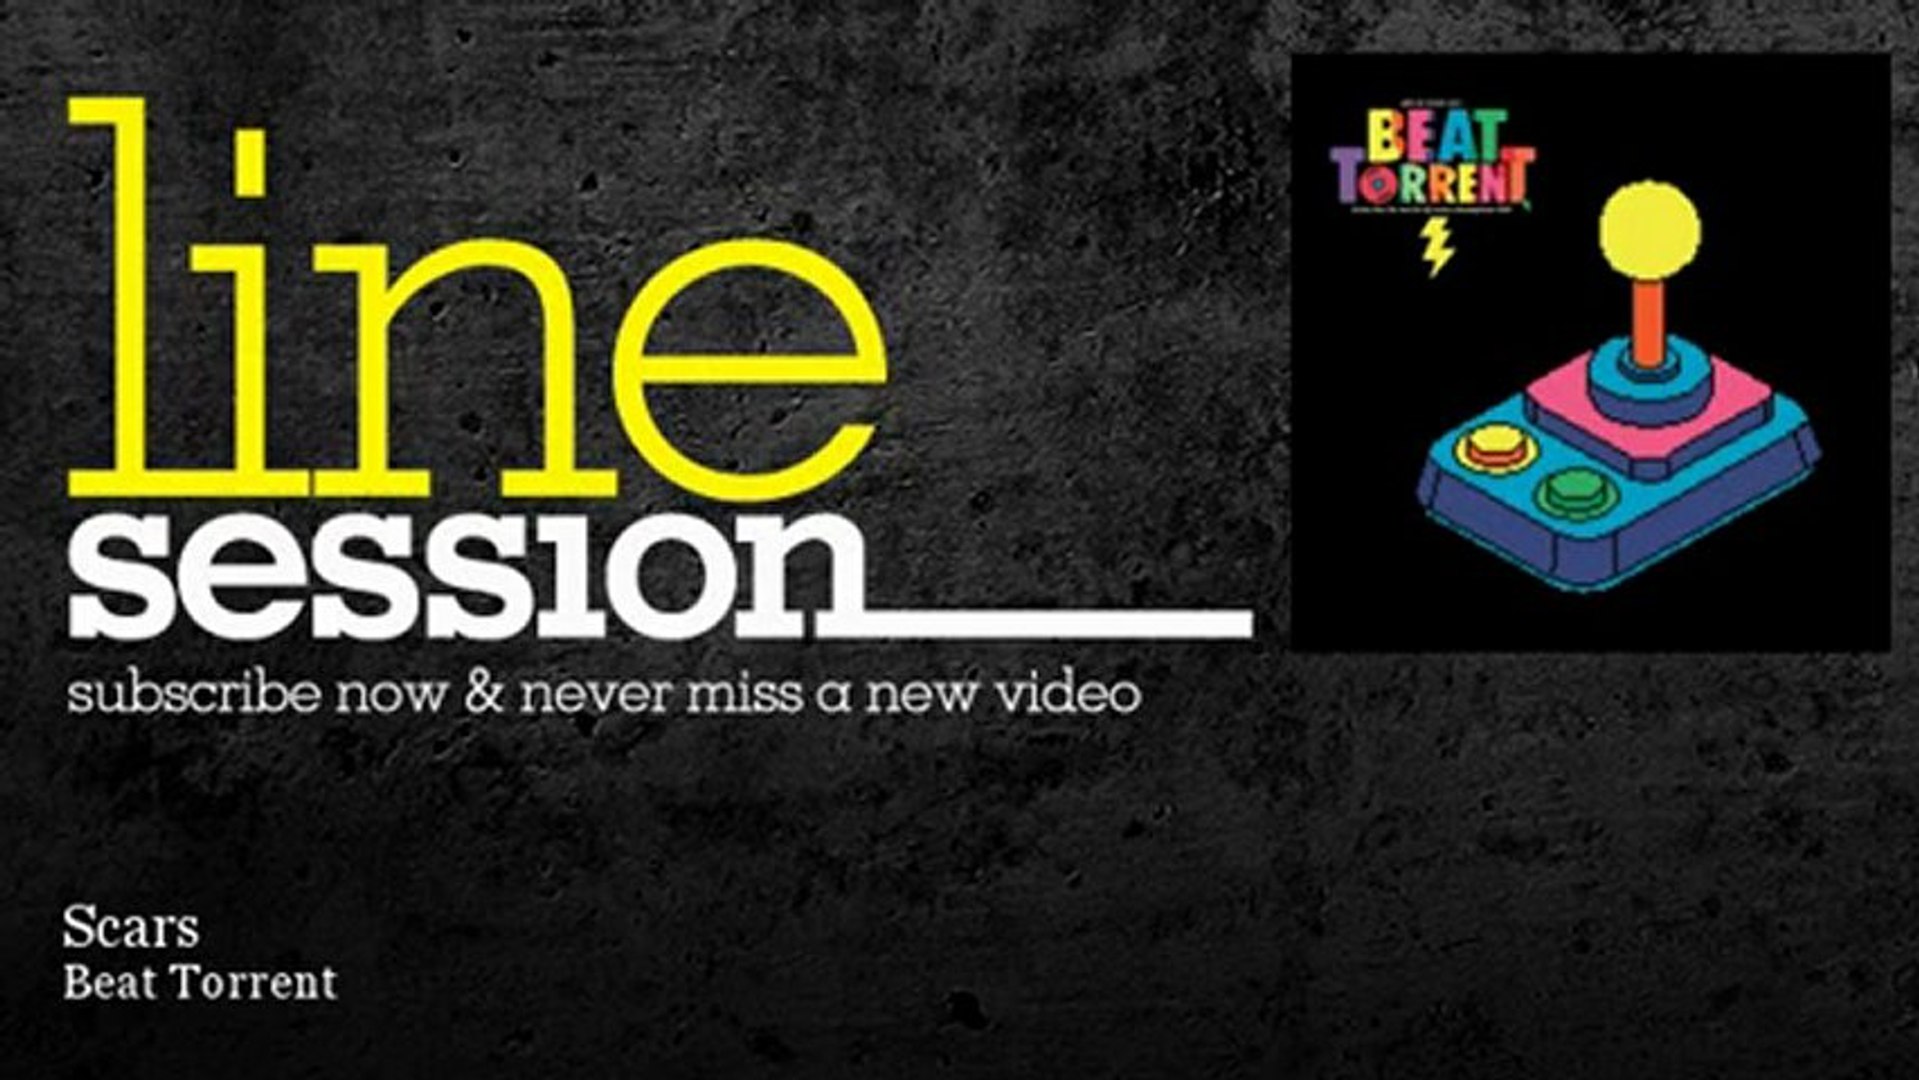 Beat Torrent - Scars - LineSession - Vidéo Dailymotion